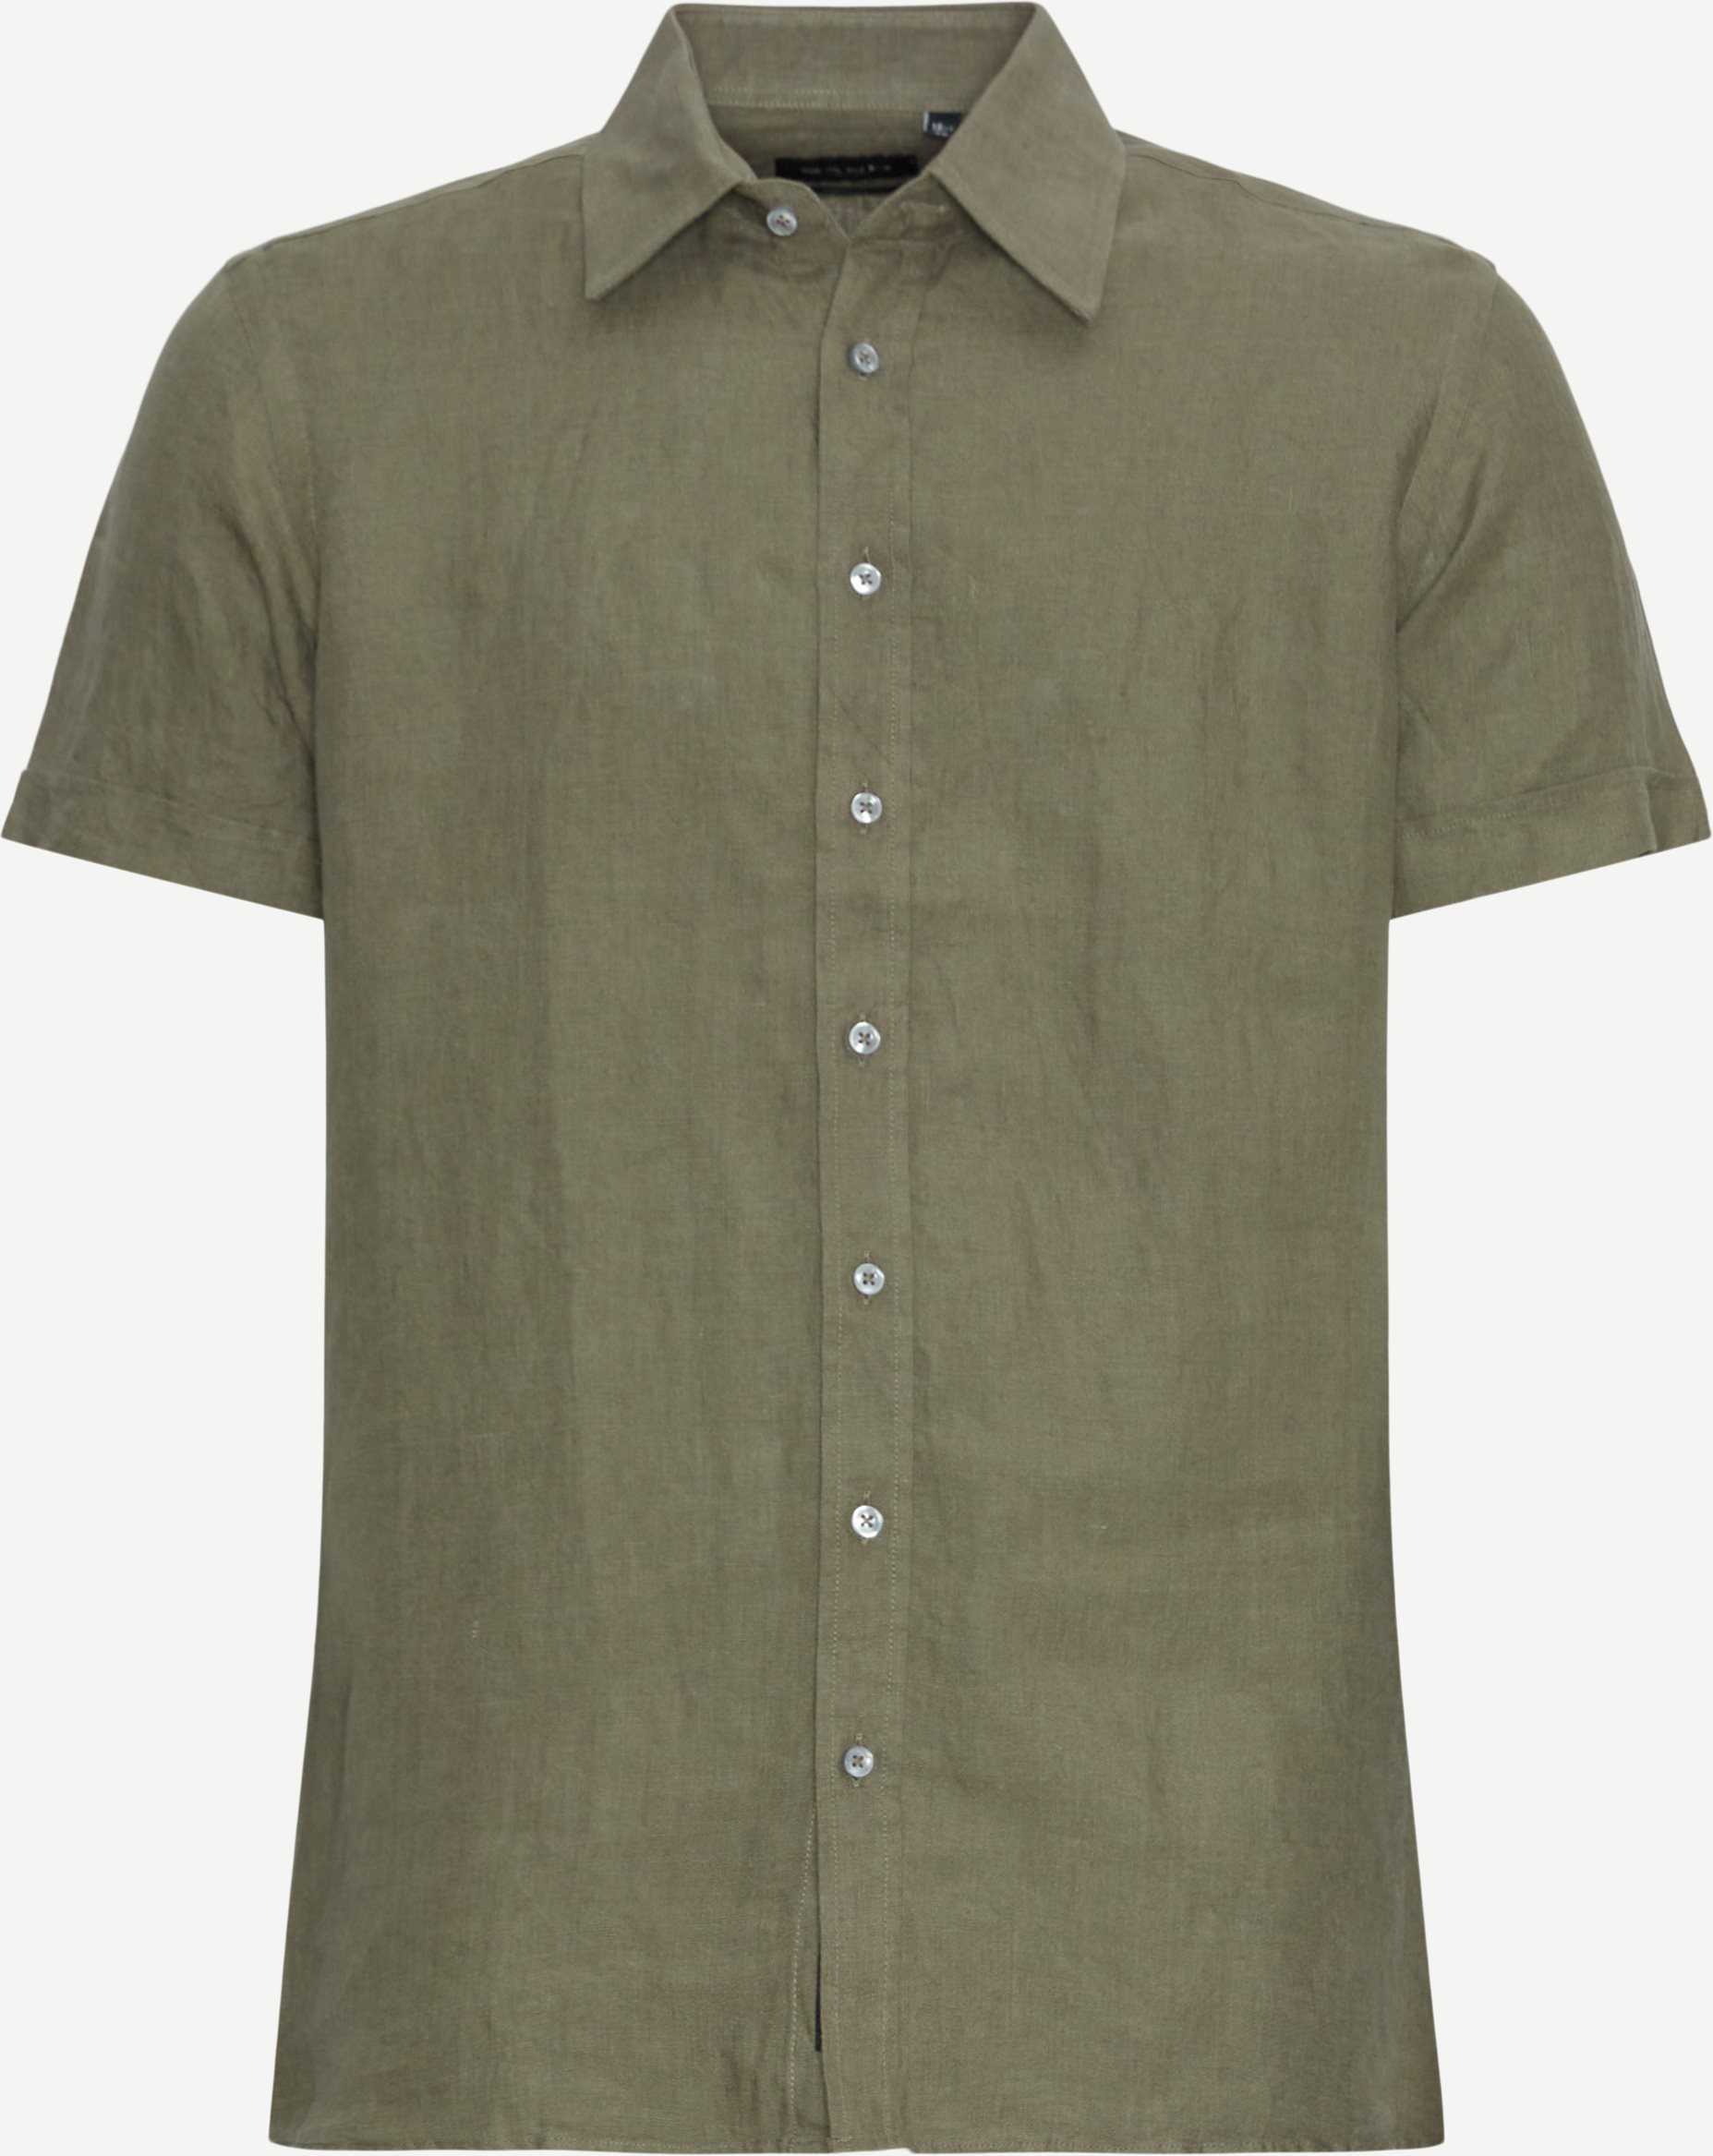 Sand Linen shirts 8823 STATE SOFT ST Army